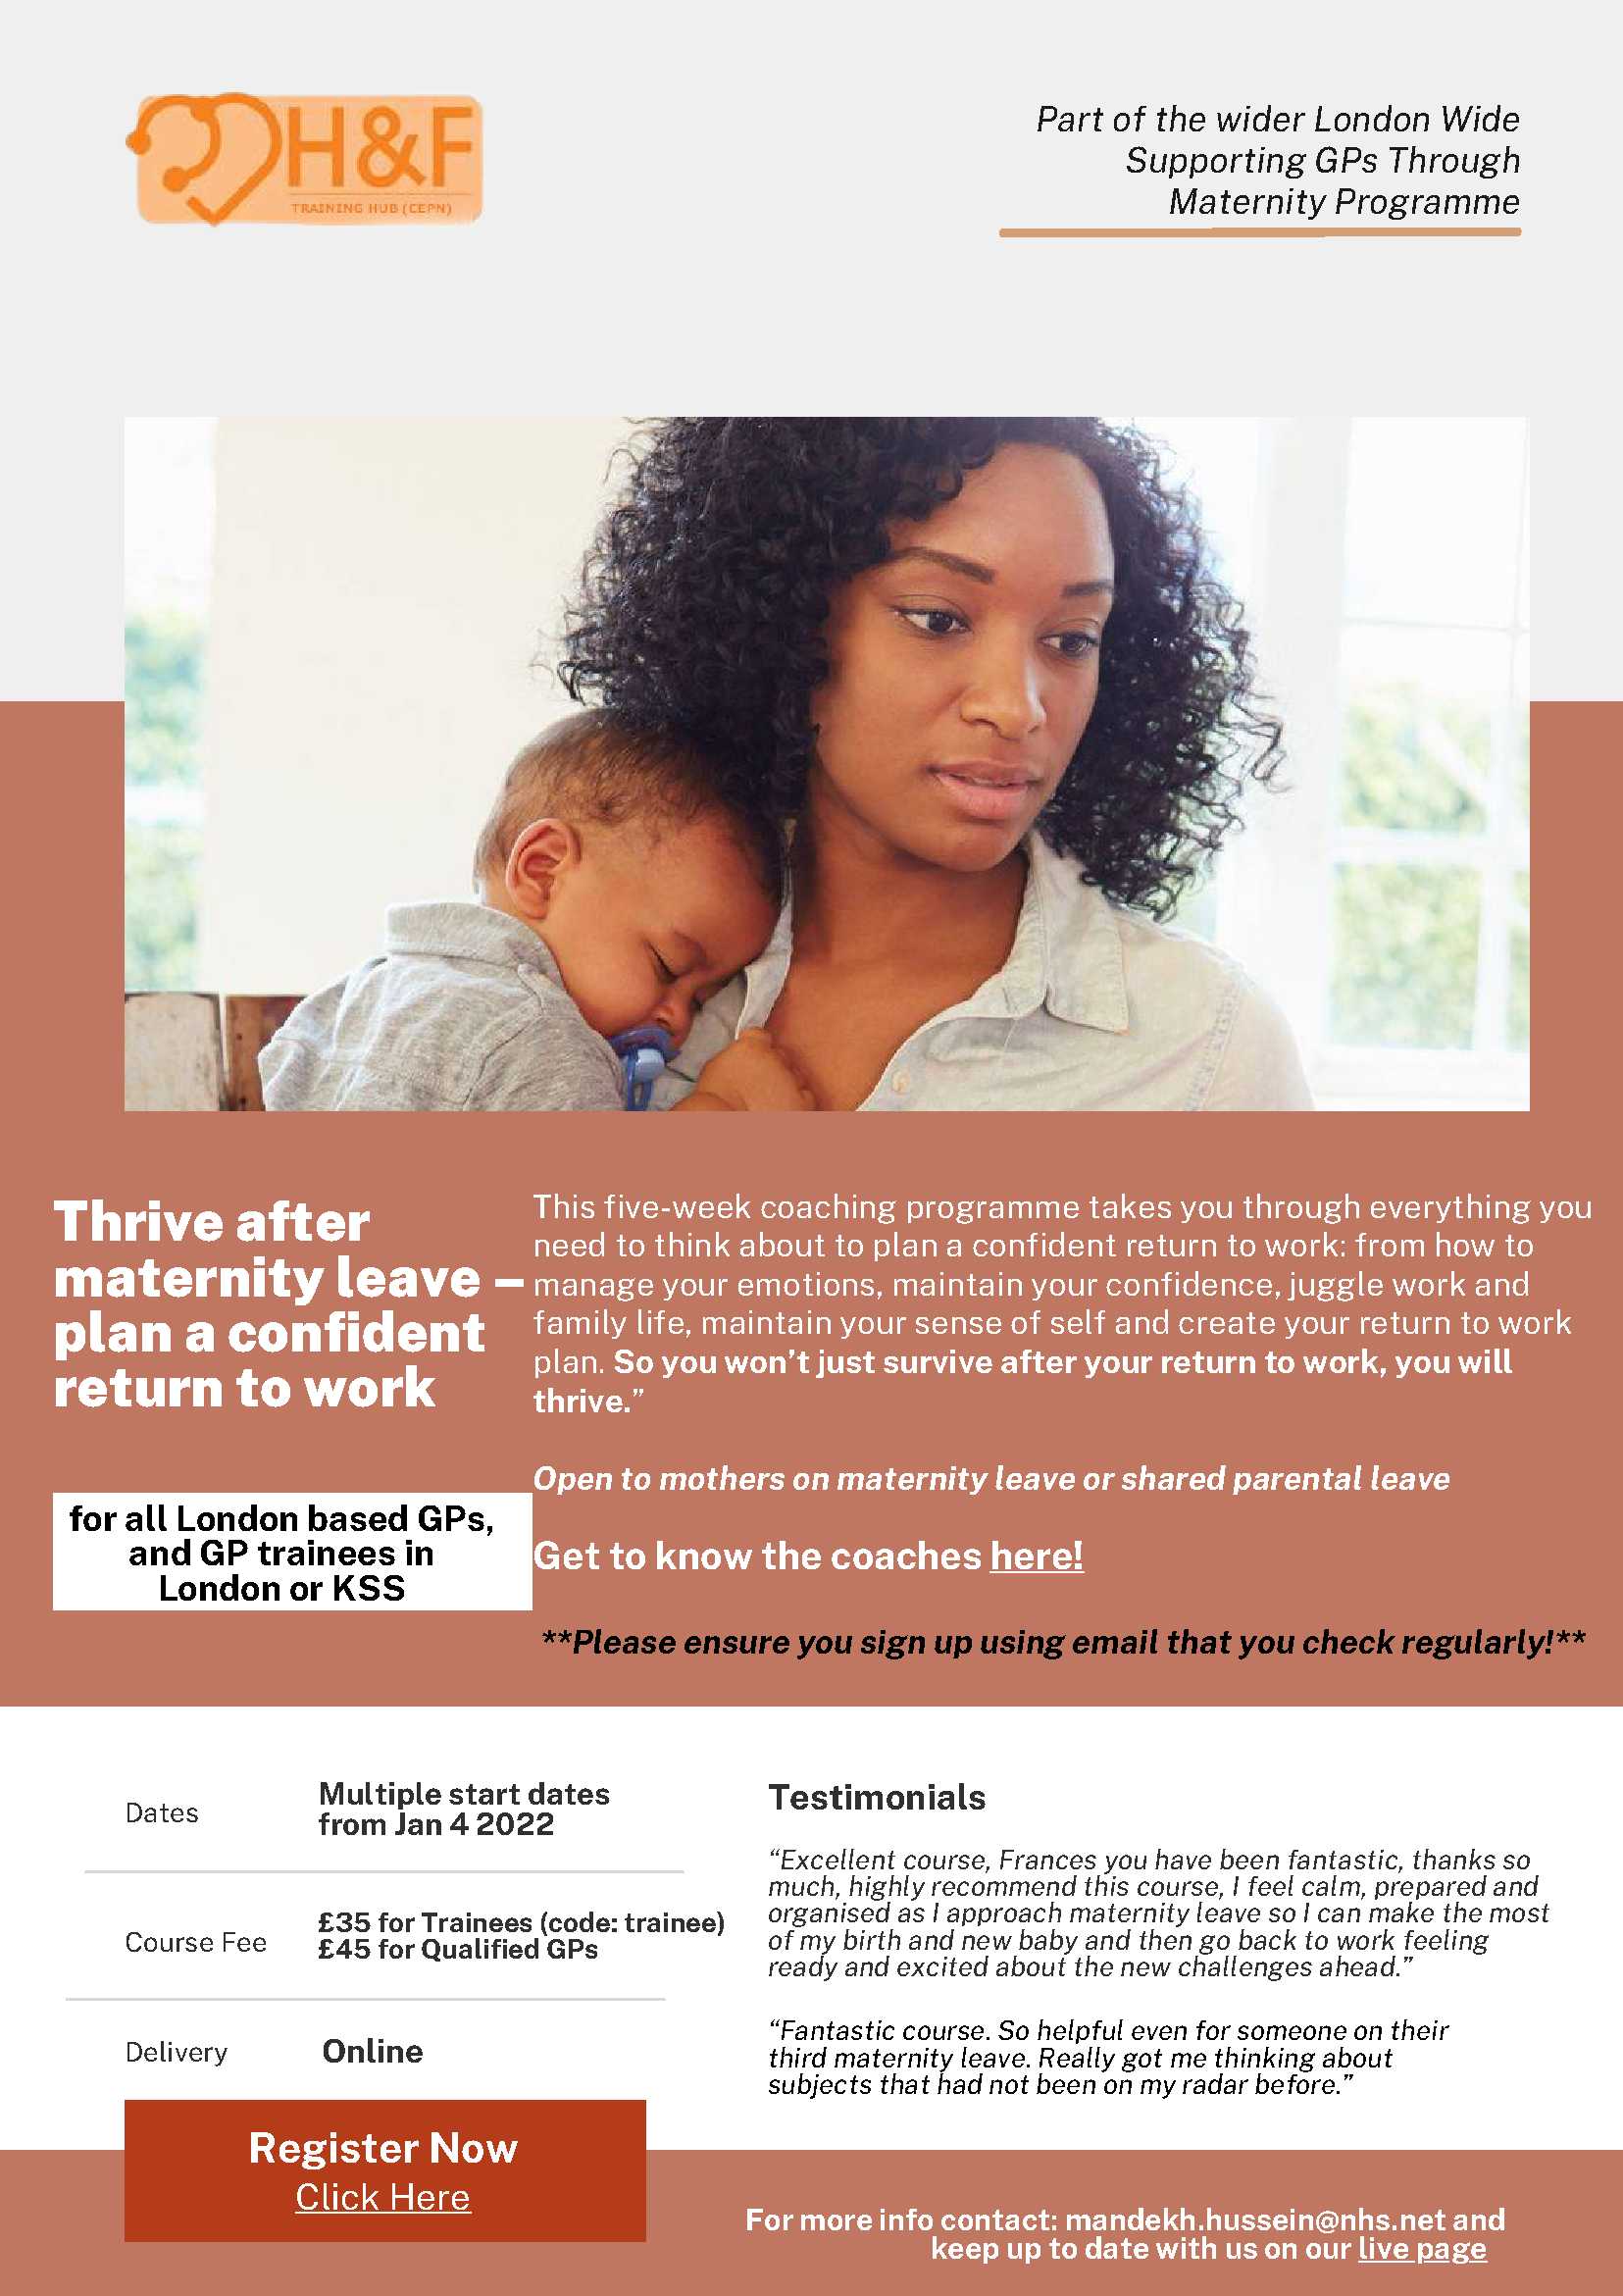 march_2022_supporting_gps_through_maternity_programme_poster_1.jpg